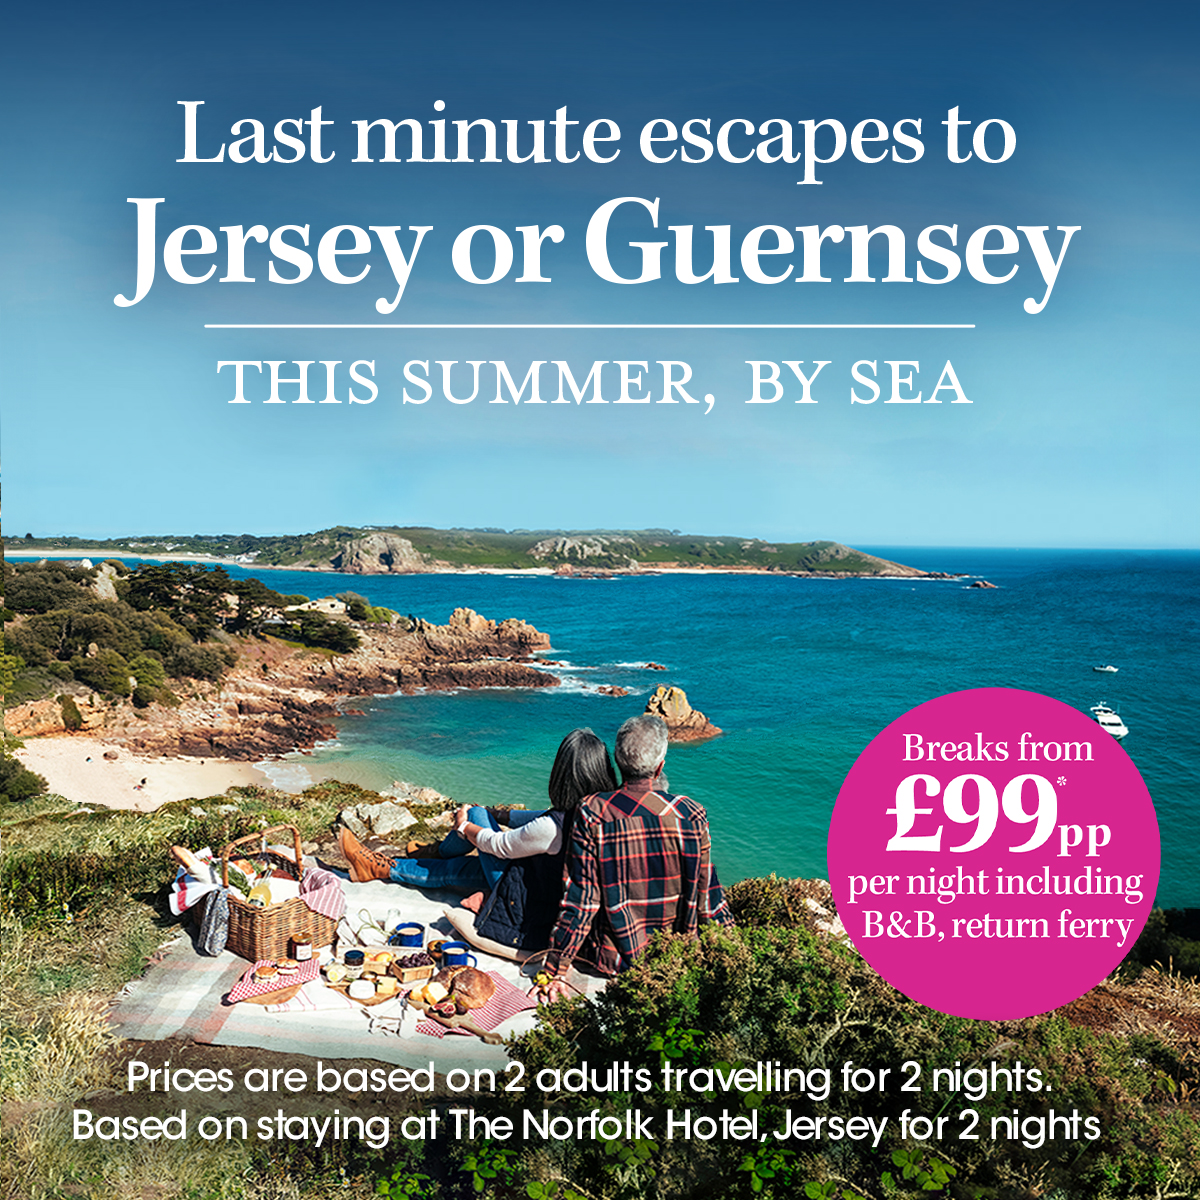 With so much to see and do this summer, now is the perfect time to book a last-minute Condor Break to Guernsey or Jersey. Book your ferry and hotel together in one, stress-free move! Explore our top offers on the website.